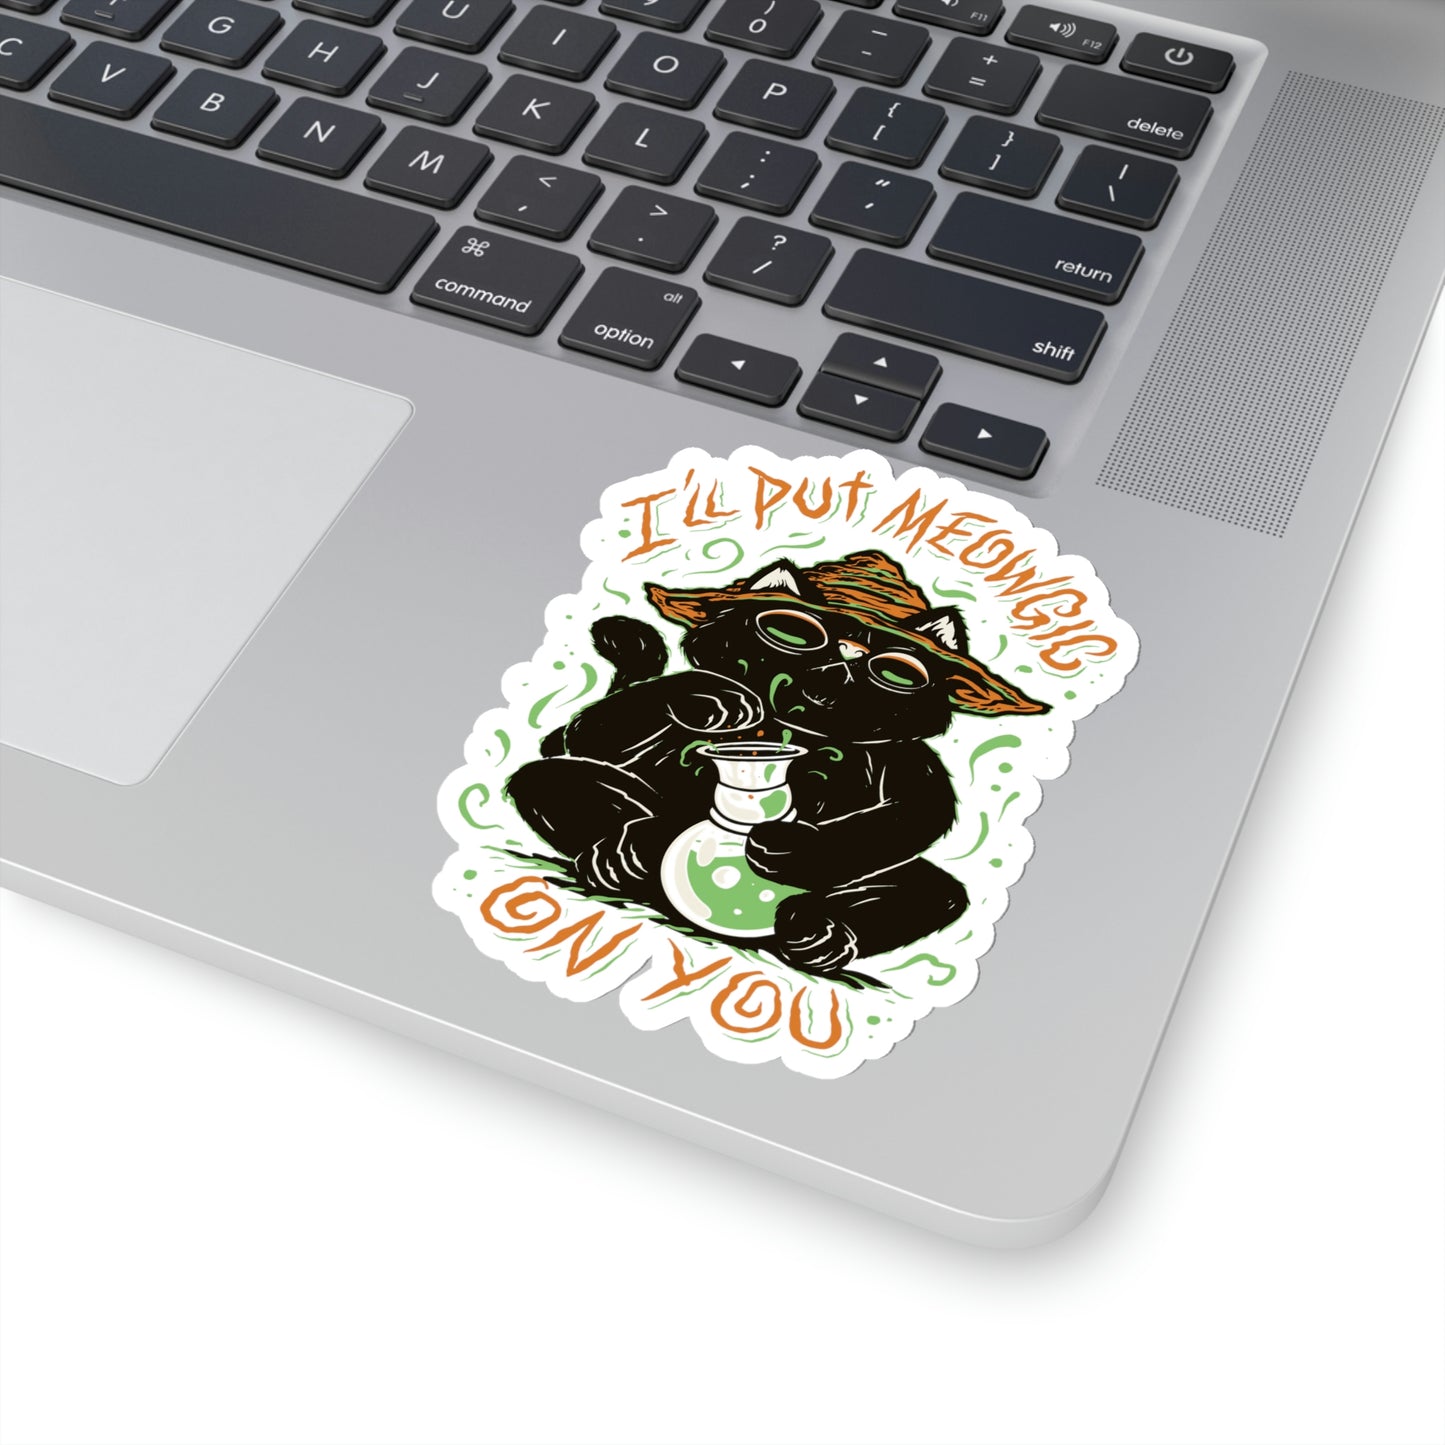 Ill put Meowgic On You Goth Aesthetic Sticker